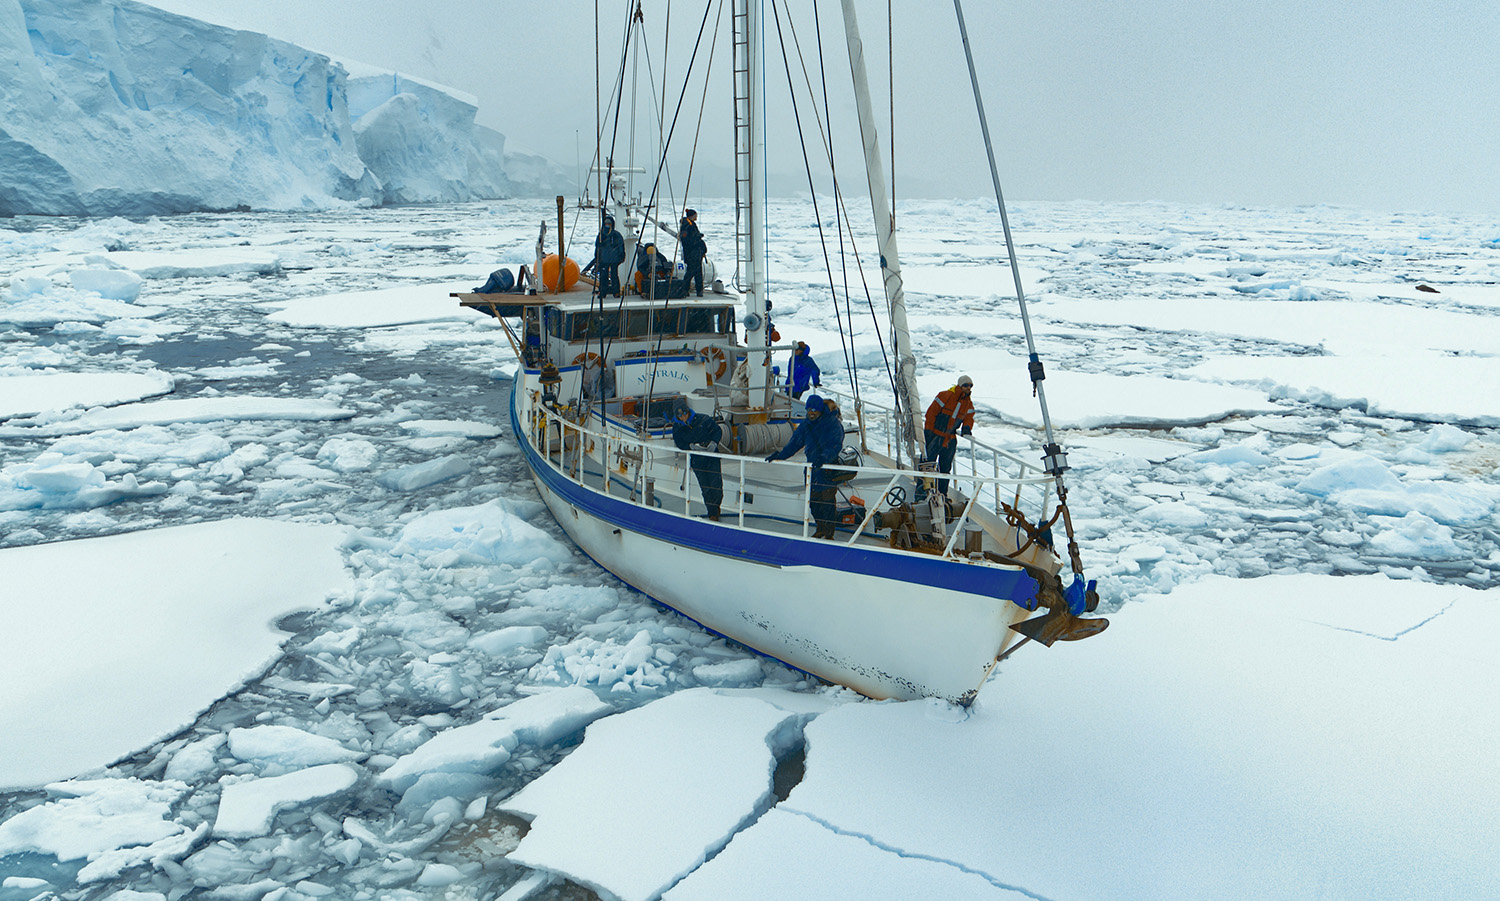 The crew onboard the Australis, heading through the ice sheets.